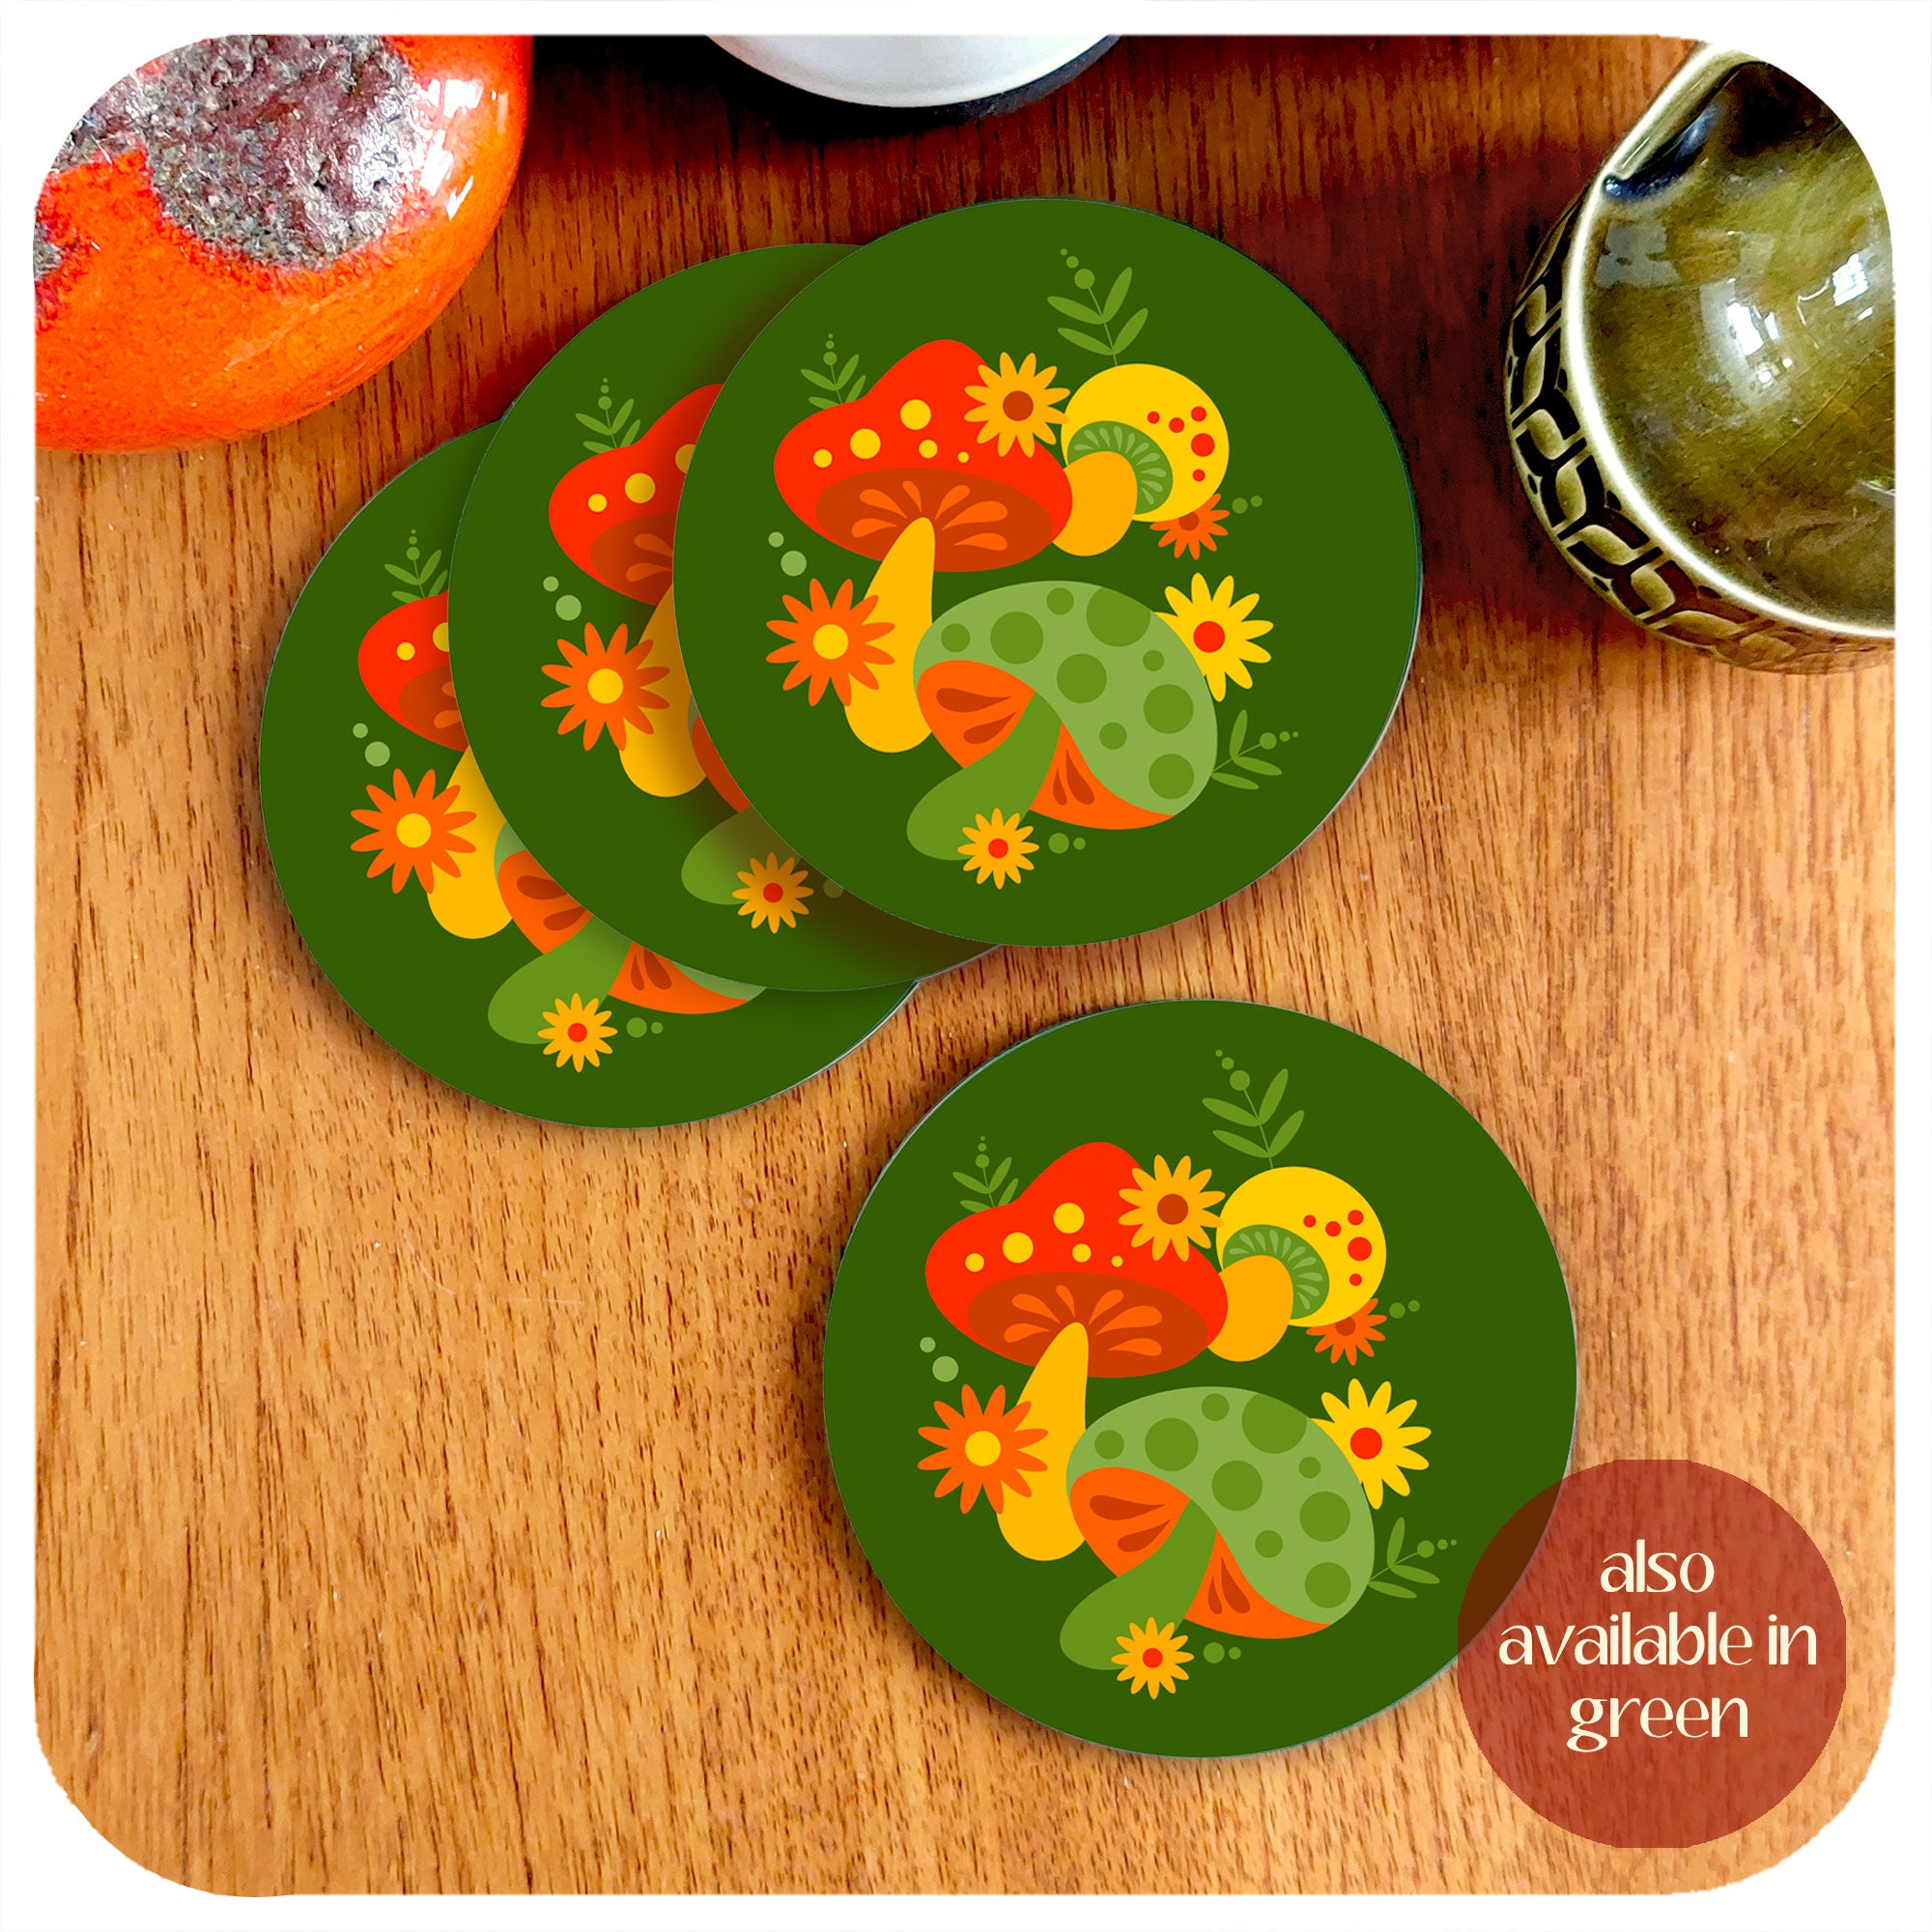 Set of four round 70s style mushroom coasters, in green, on a teak table surrounded by various vintage mid century pottery pieces. Text in corner reads: also available in green | The Inkabilly Emporium